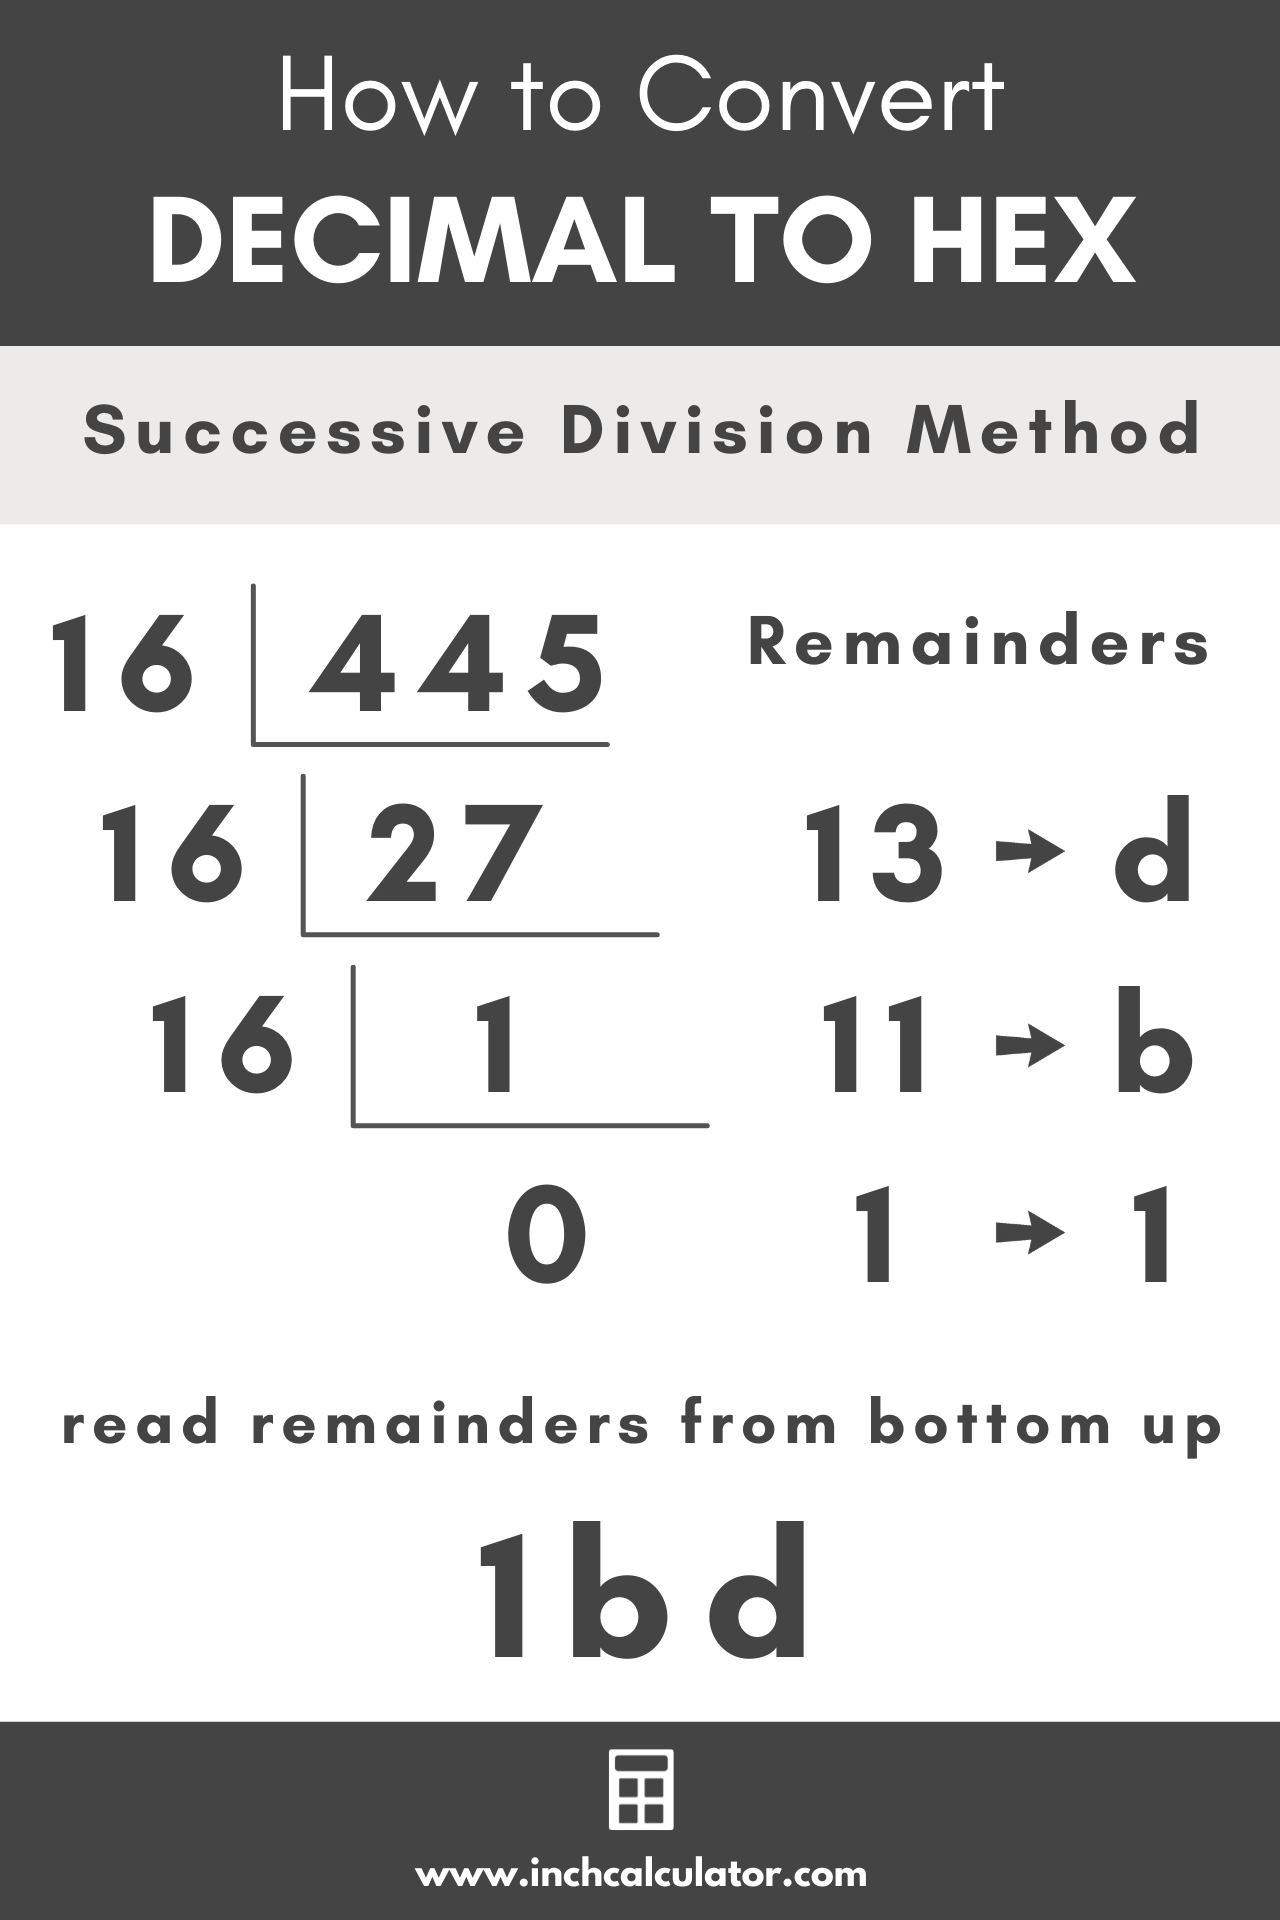 graphic showing how to convert a decimal number to hex